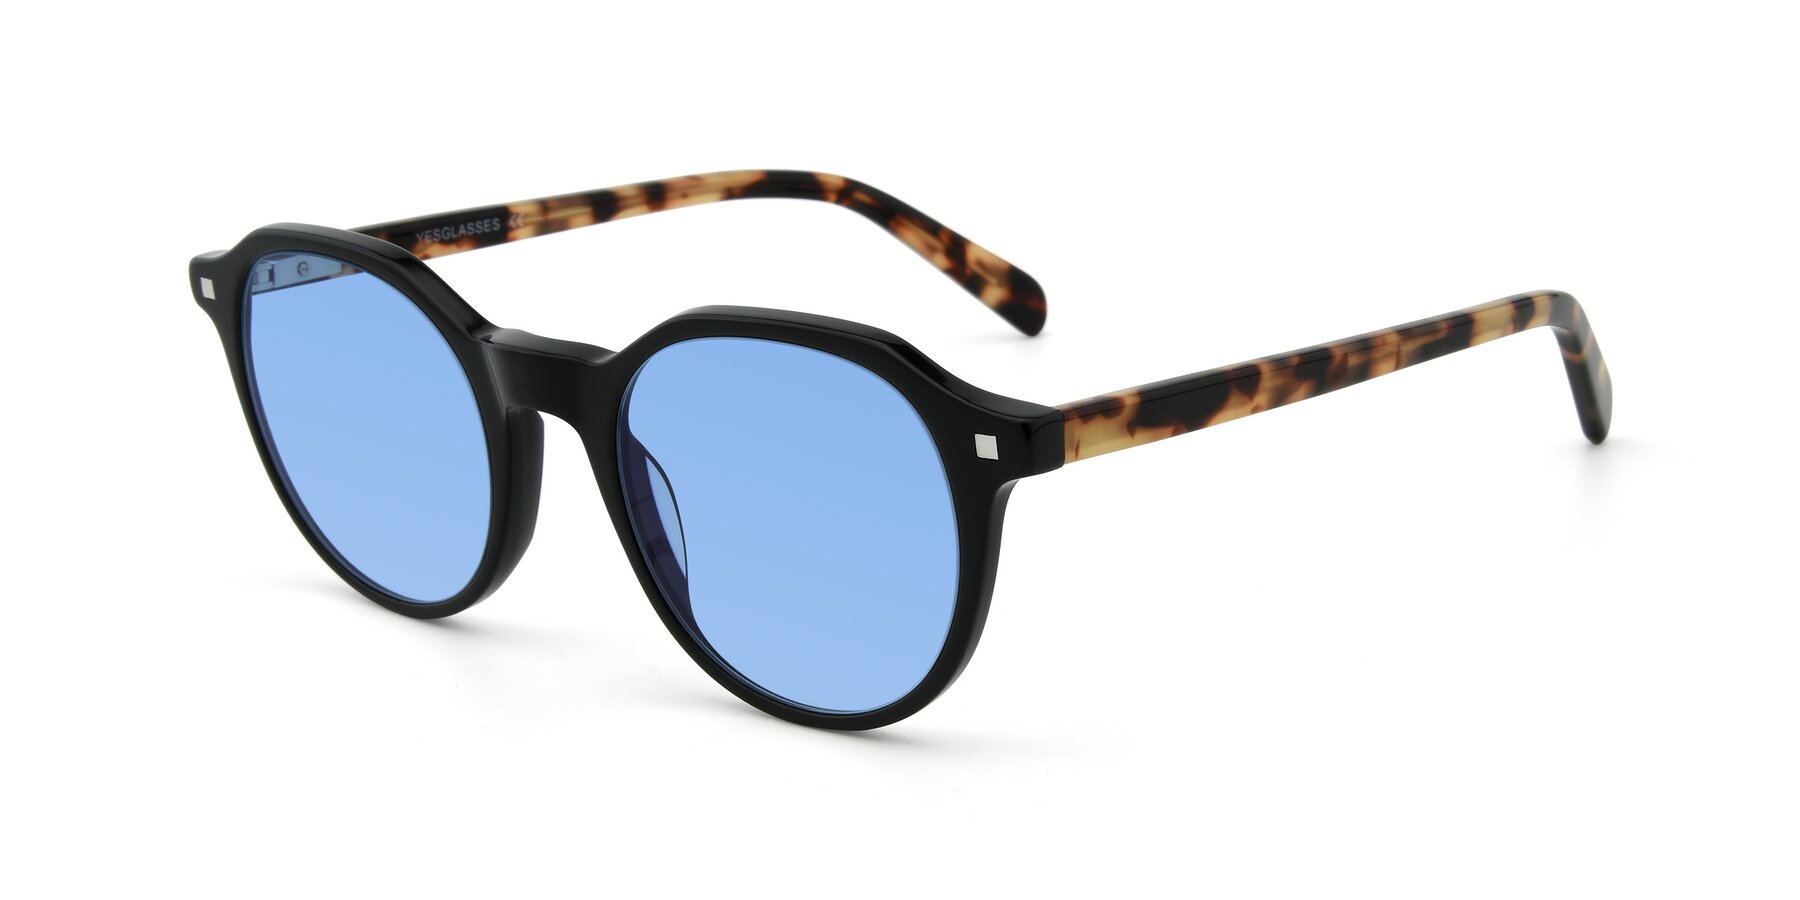 Angle of 17425 in Black with Medium Blue Tinted Lenses